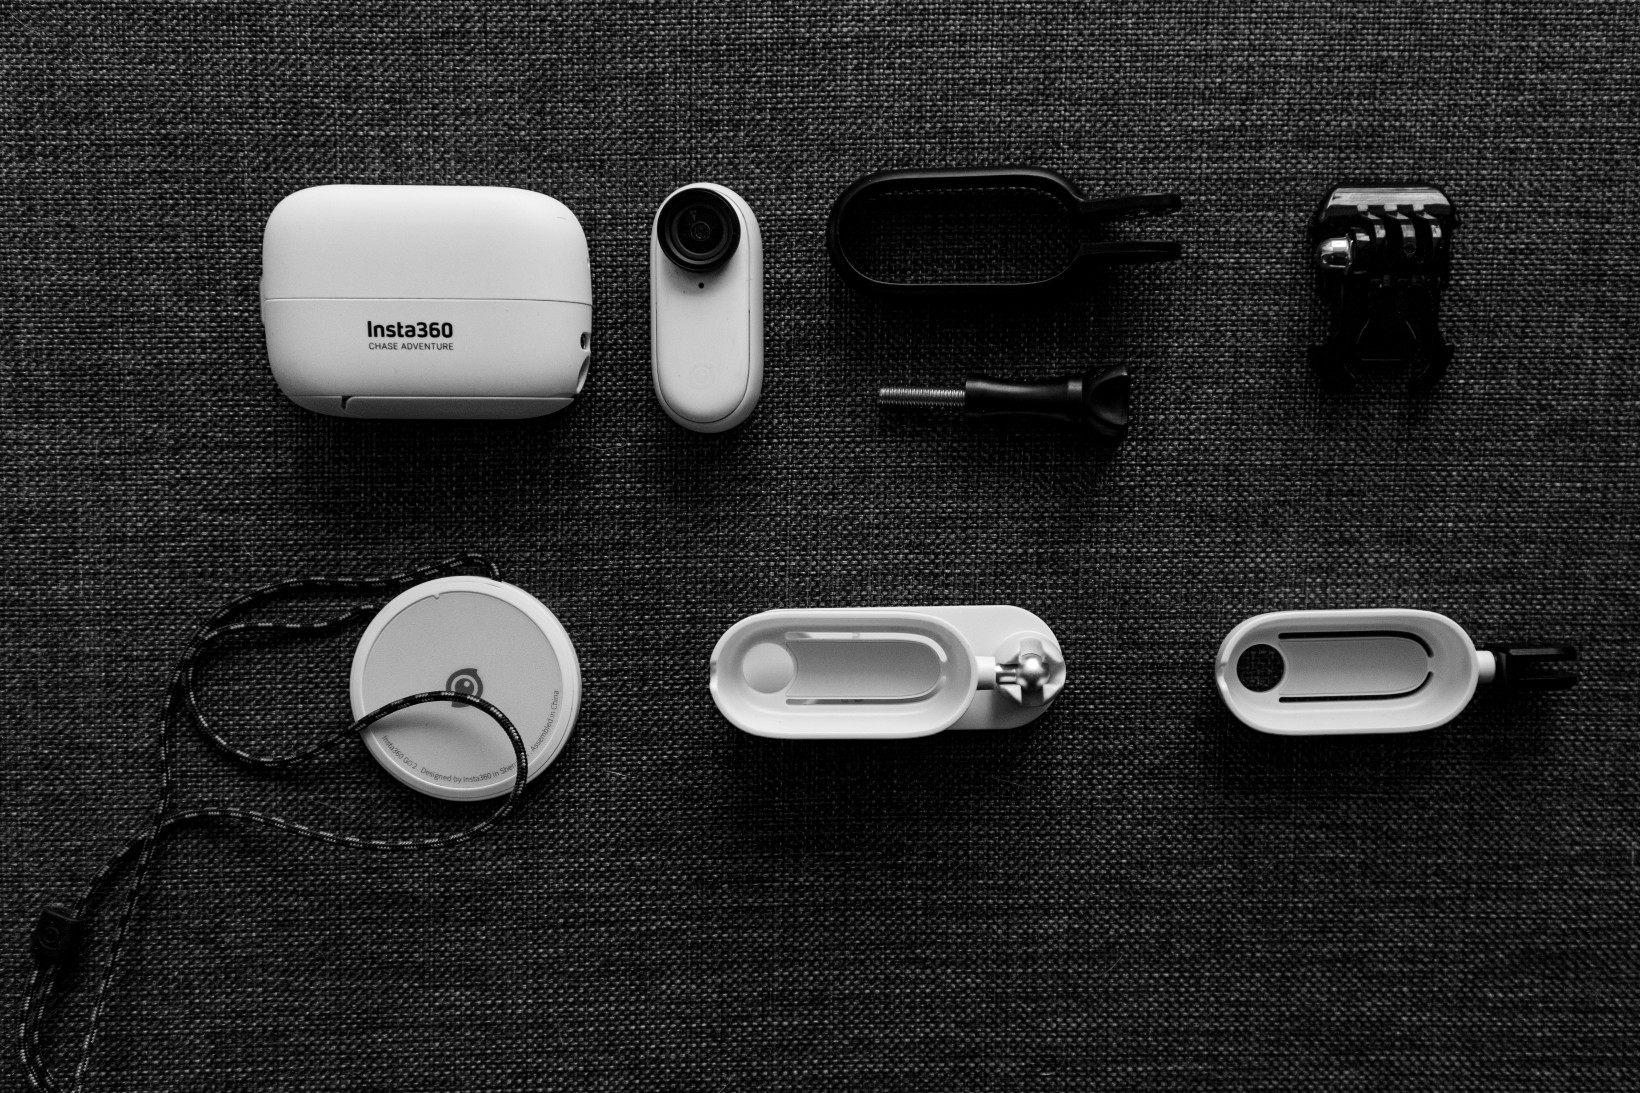 The Go 2 comes with a host of accessories to mount the camera for a variety of applications